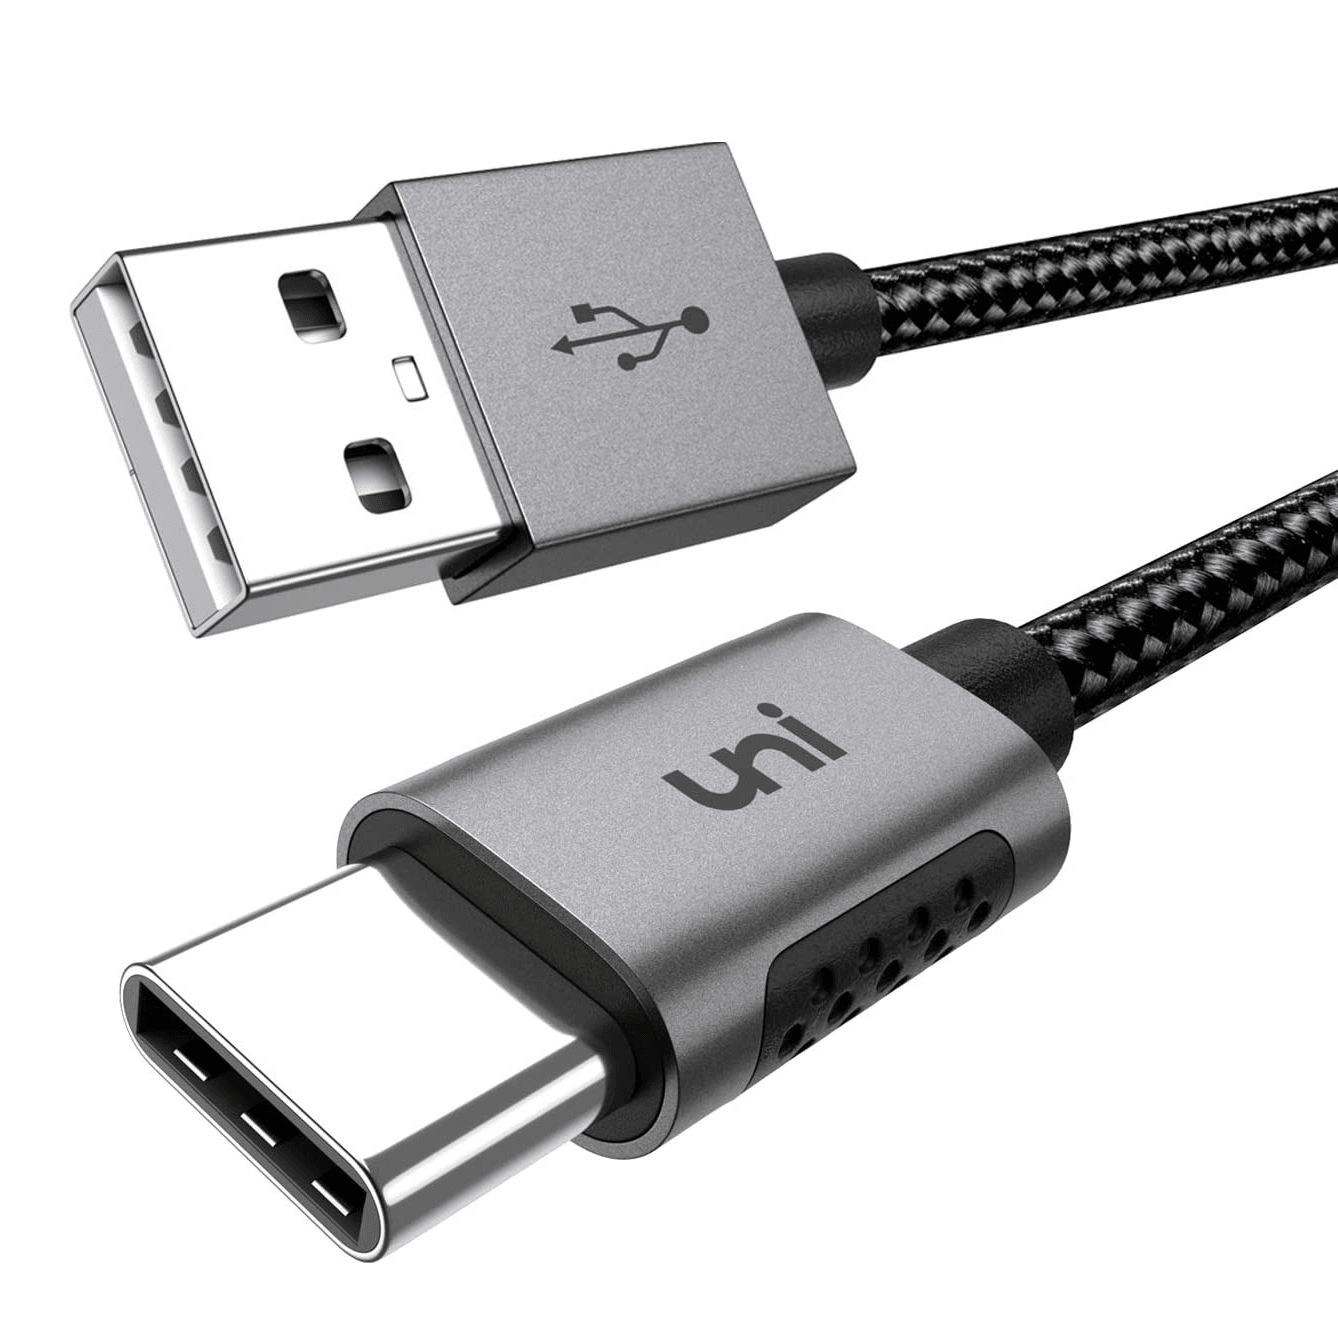 USB Cables, USB Charging Cable, Data Transfer and Video Cables | uni